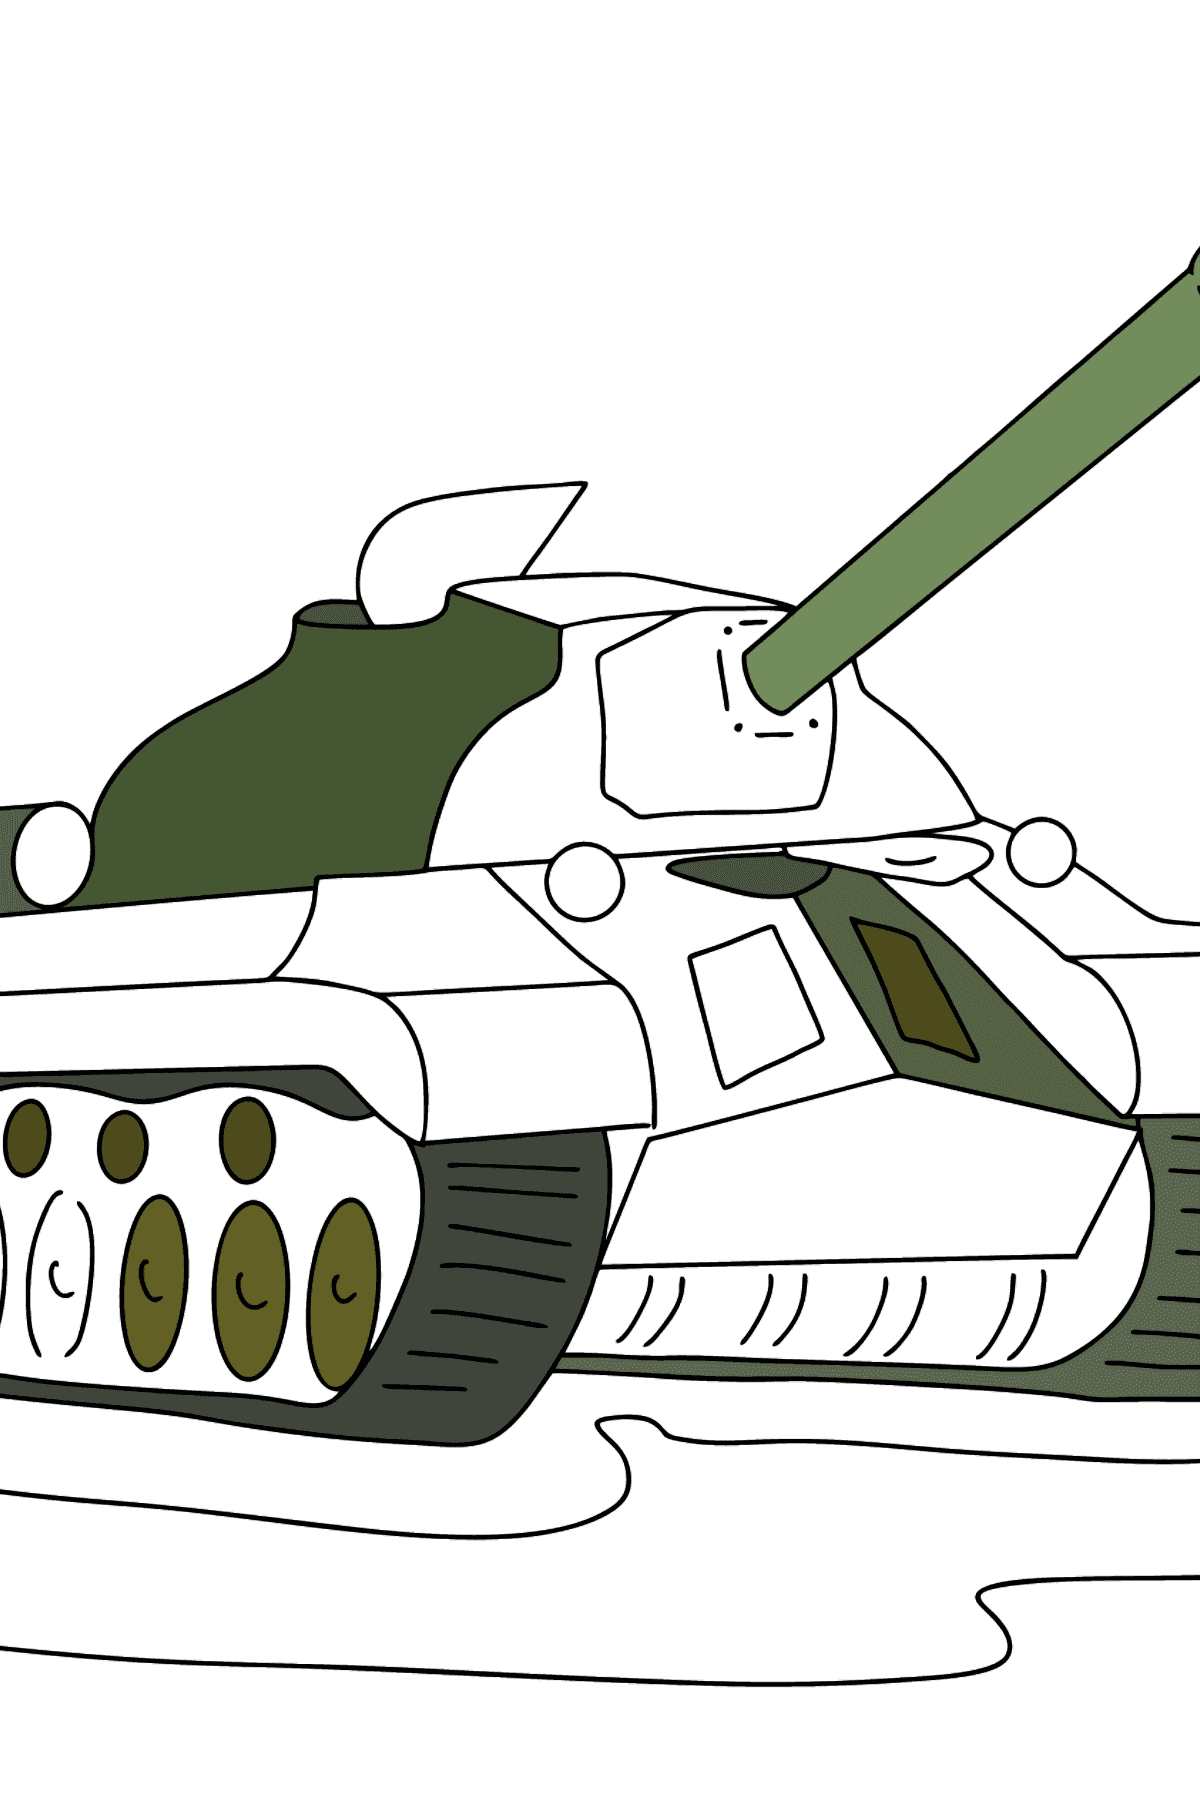 Tank IS 3 coloring page - Coloring Pages for Kids